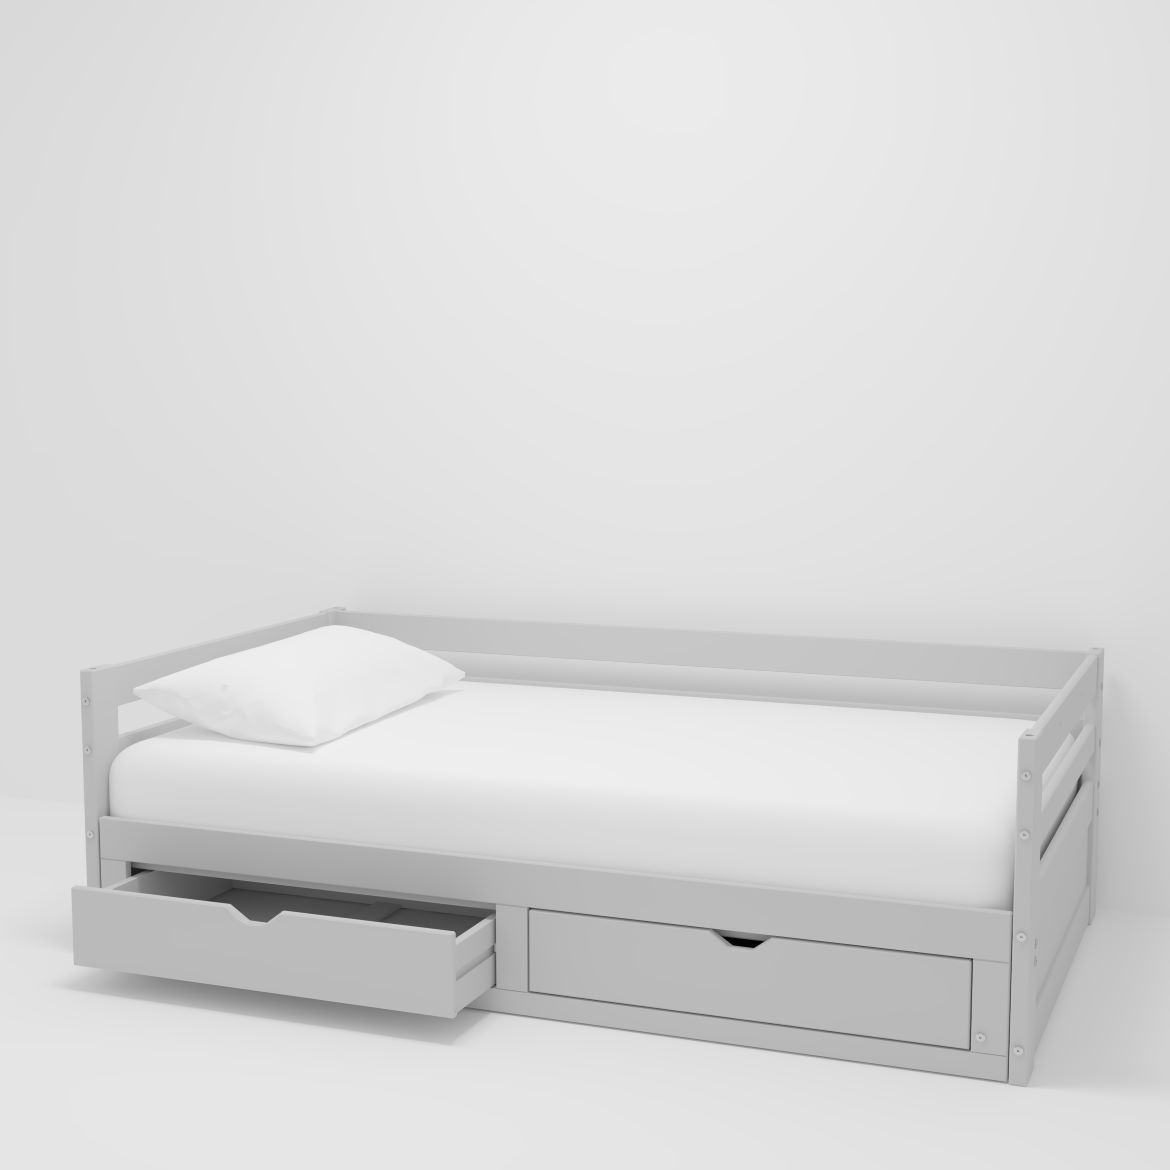 Twin to King Melody Day Kids' Bed with Storage White - Bolton Furniture